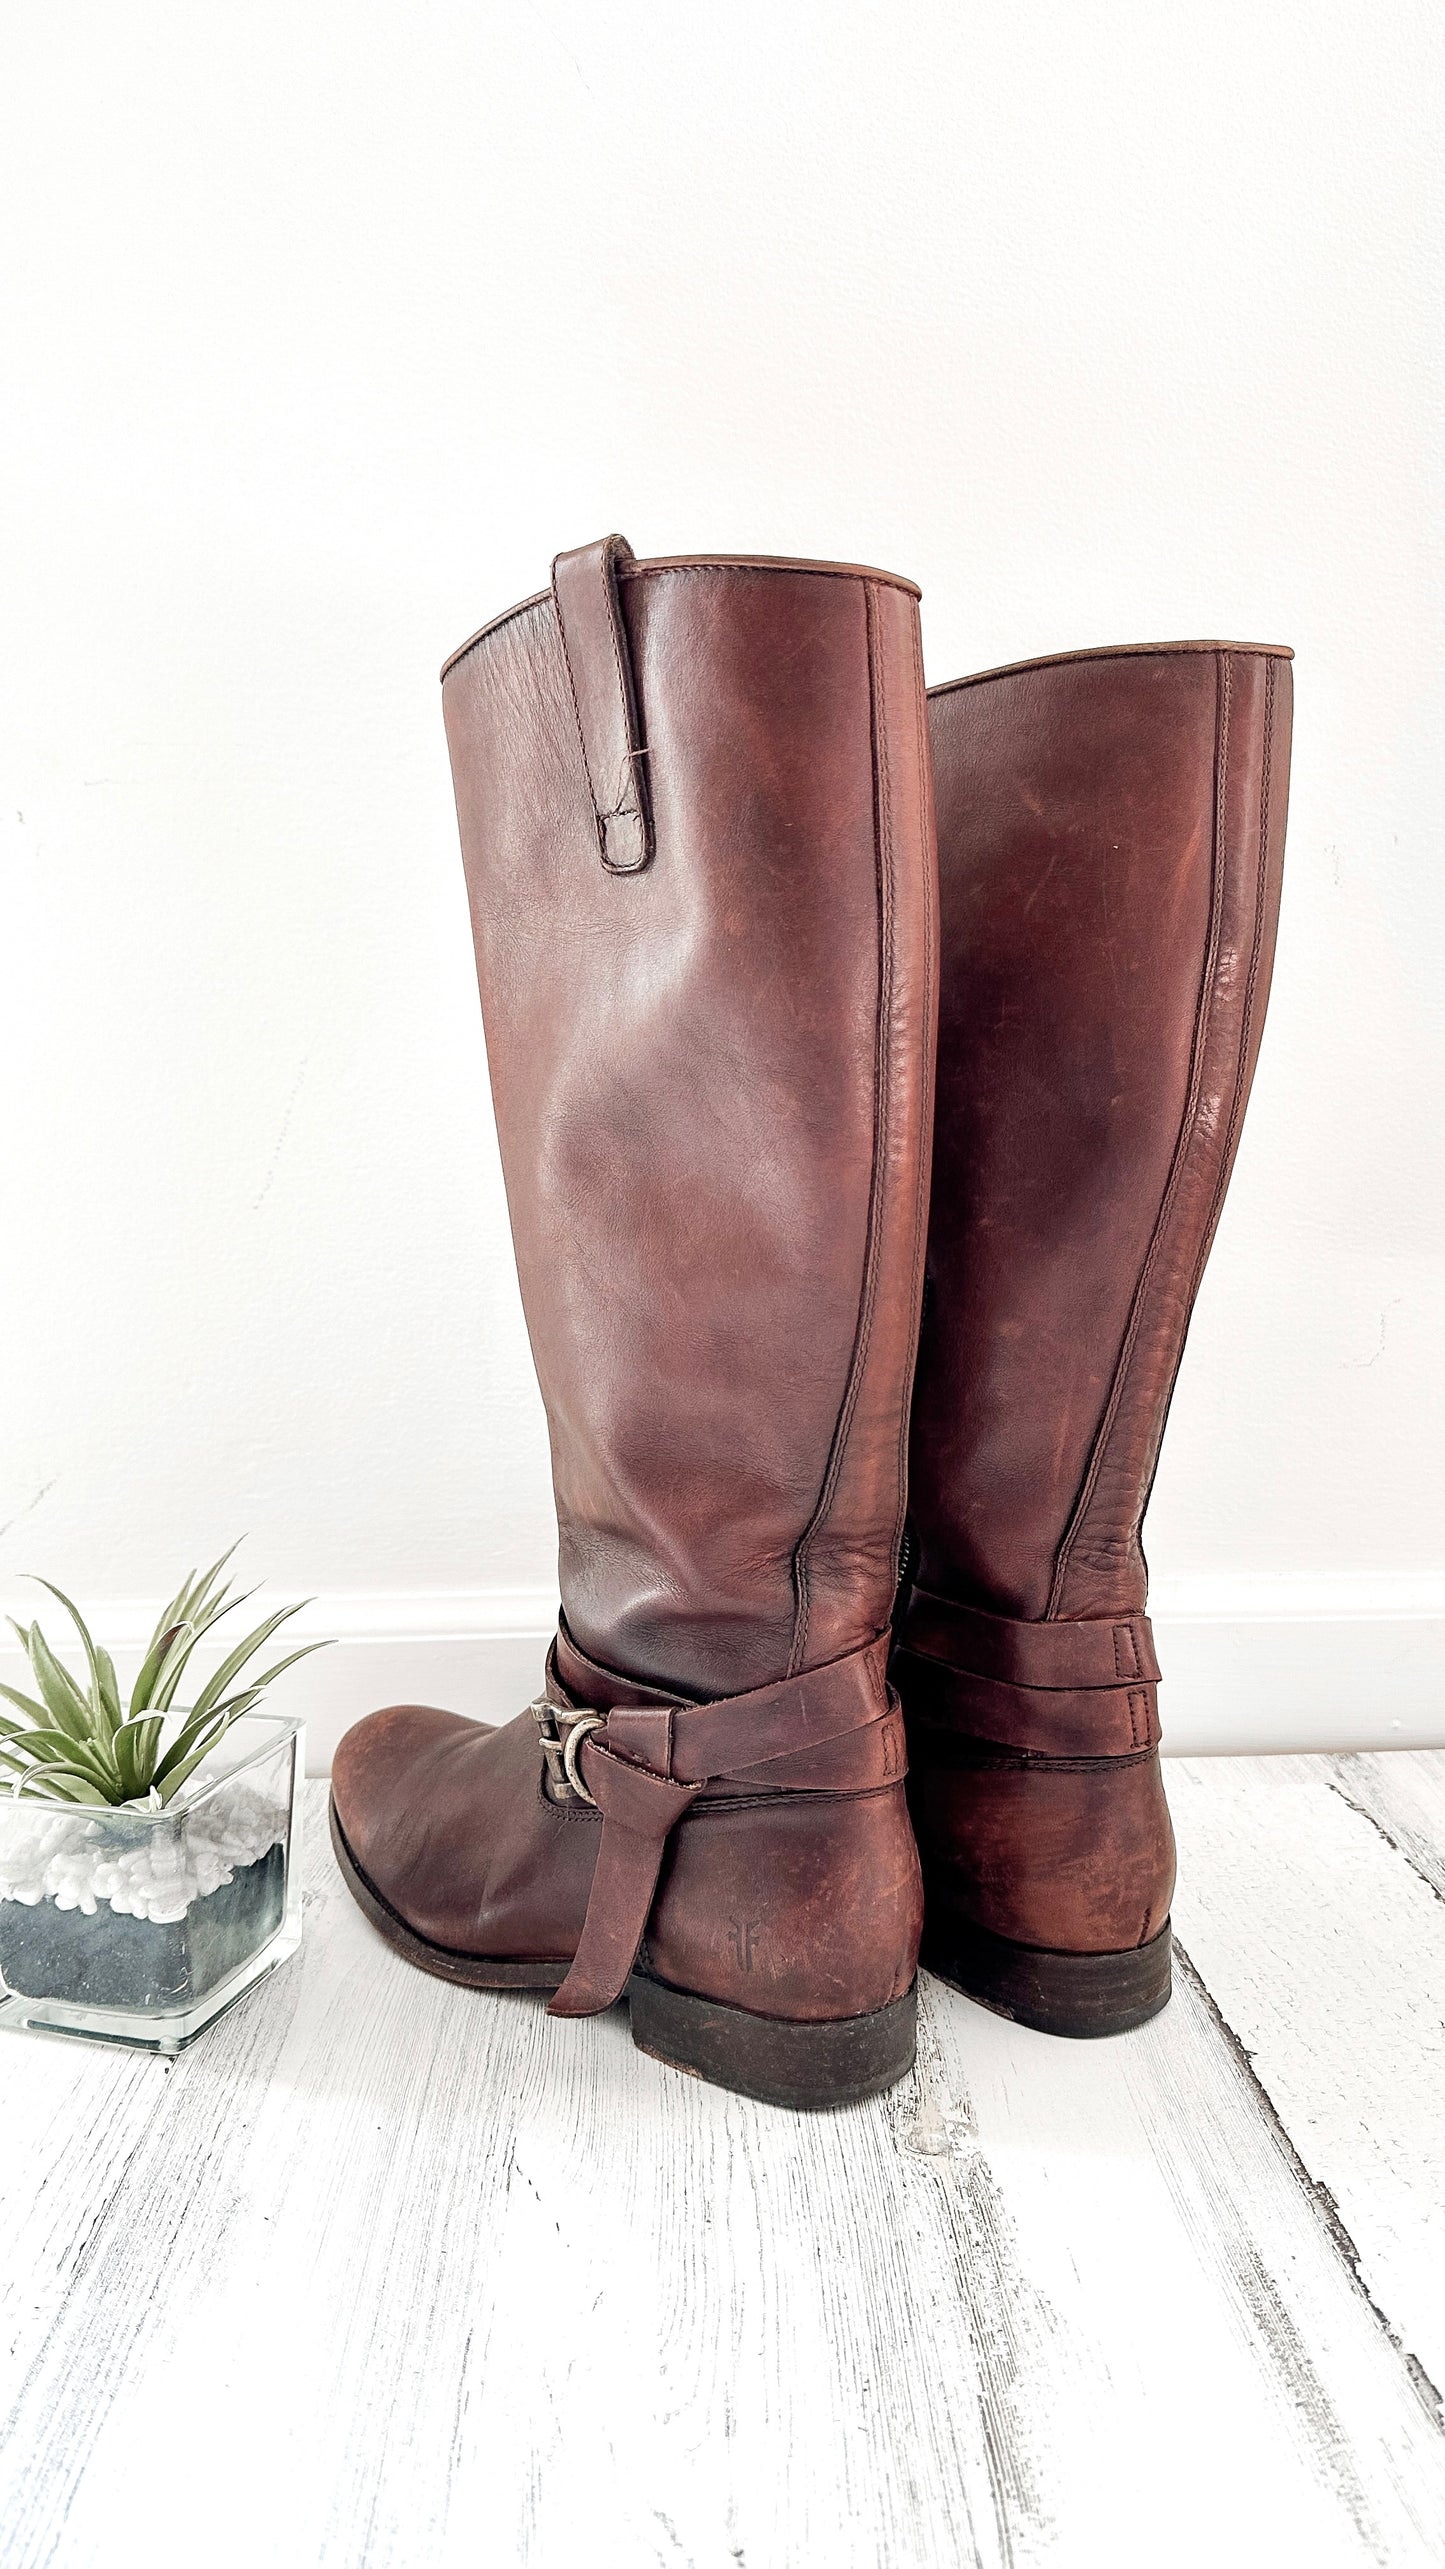 FRYE Melissa Knotted Tall Brown Leather Riding Boots (8)